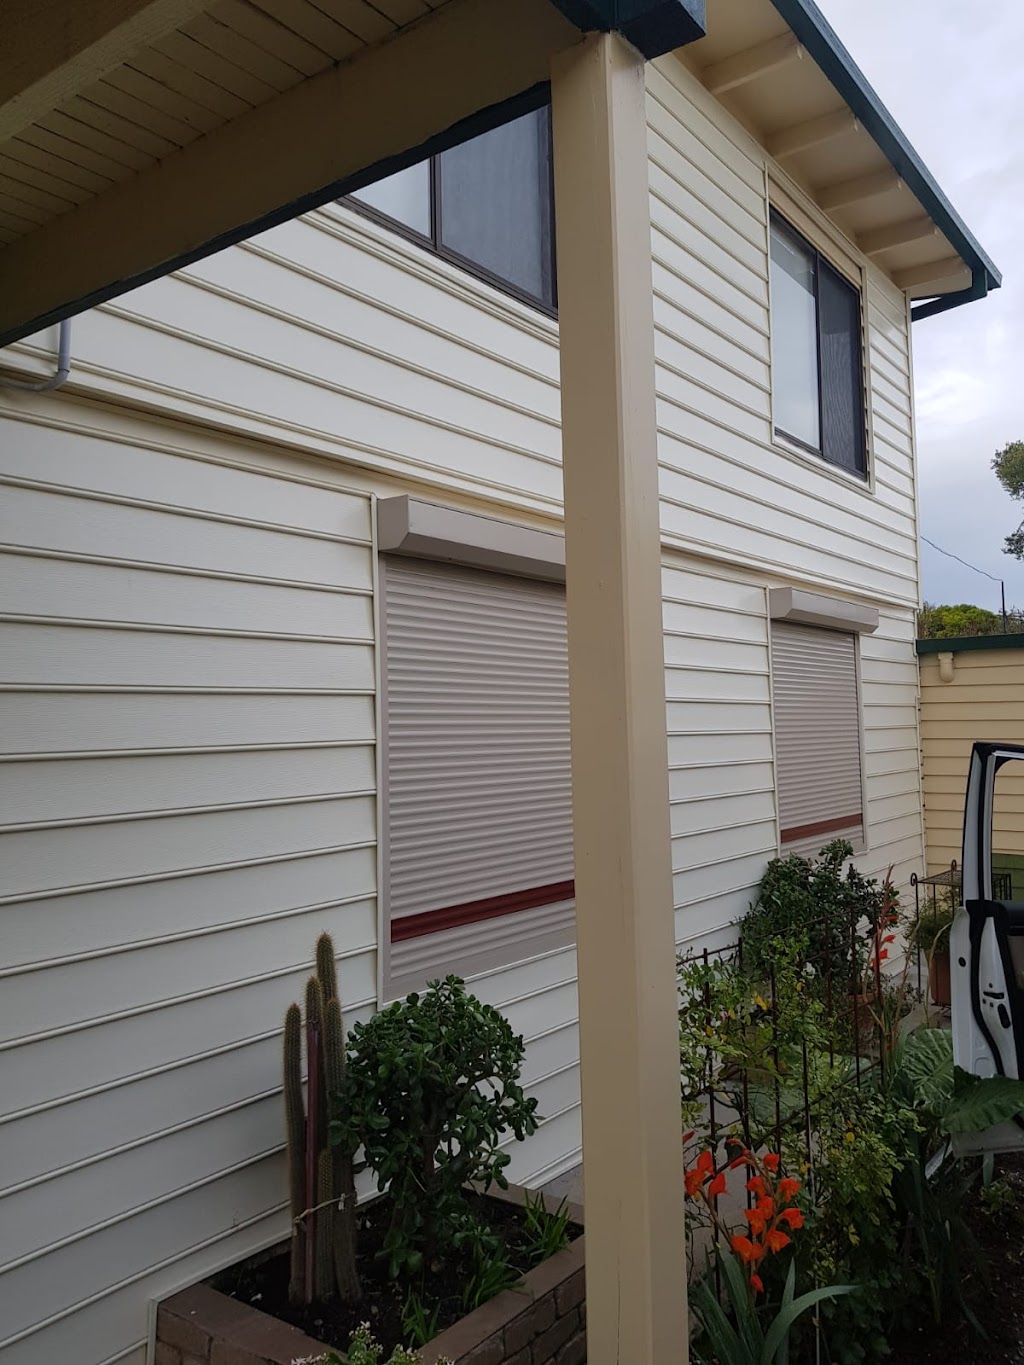 Connelly home improvements | 931 Scobie Rd, Tongala VIC 3621, Australia | Phone: 1800 458 123